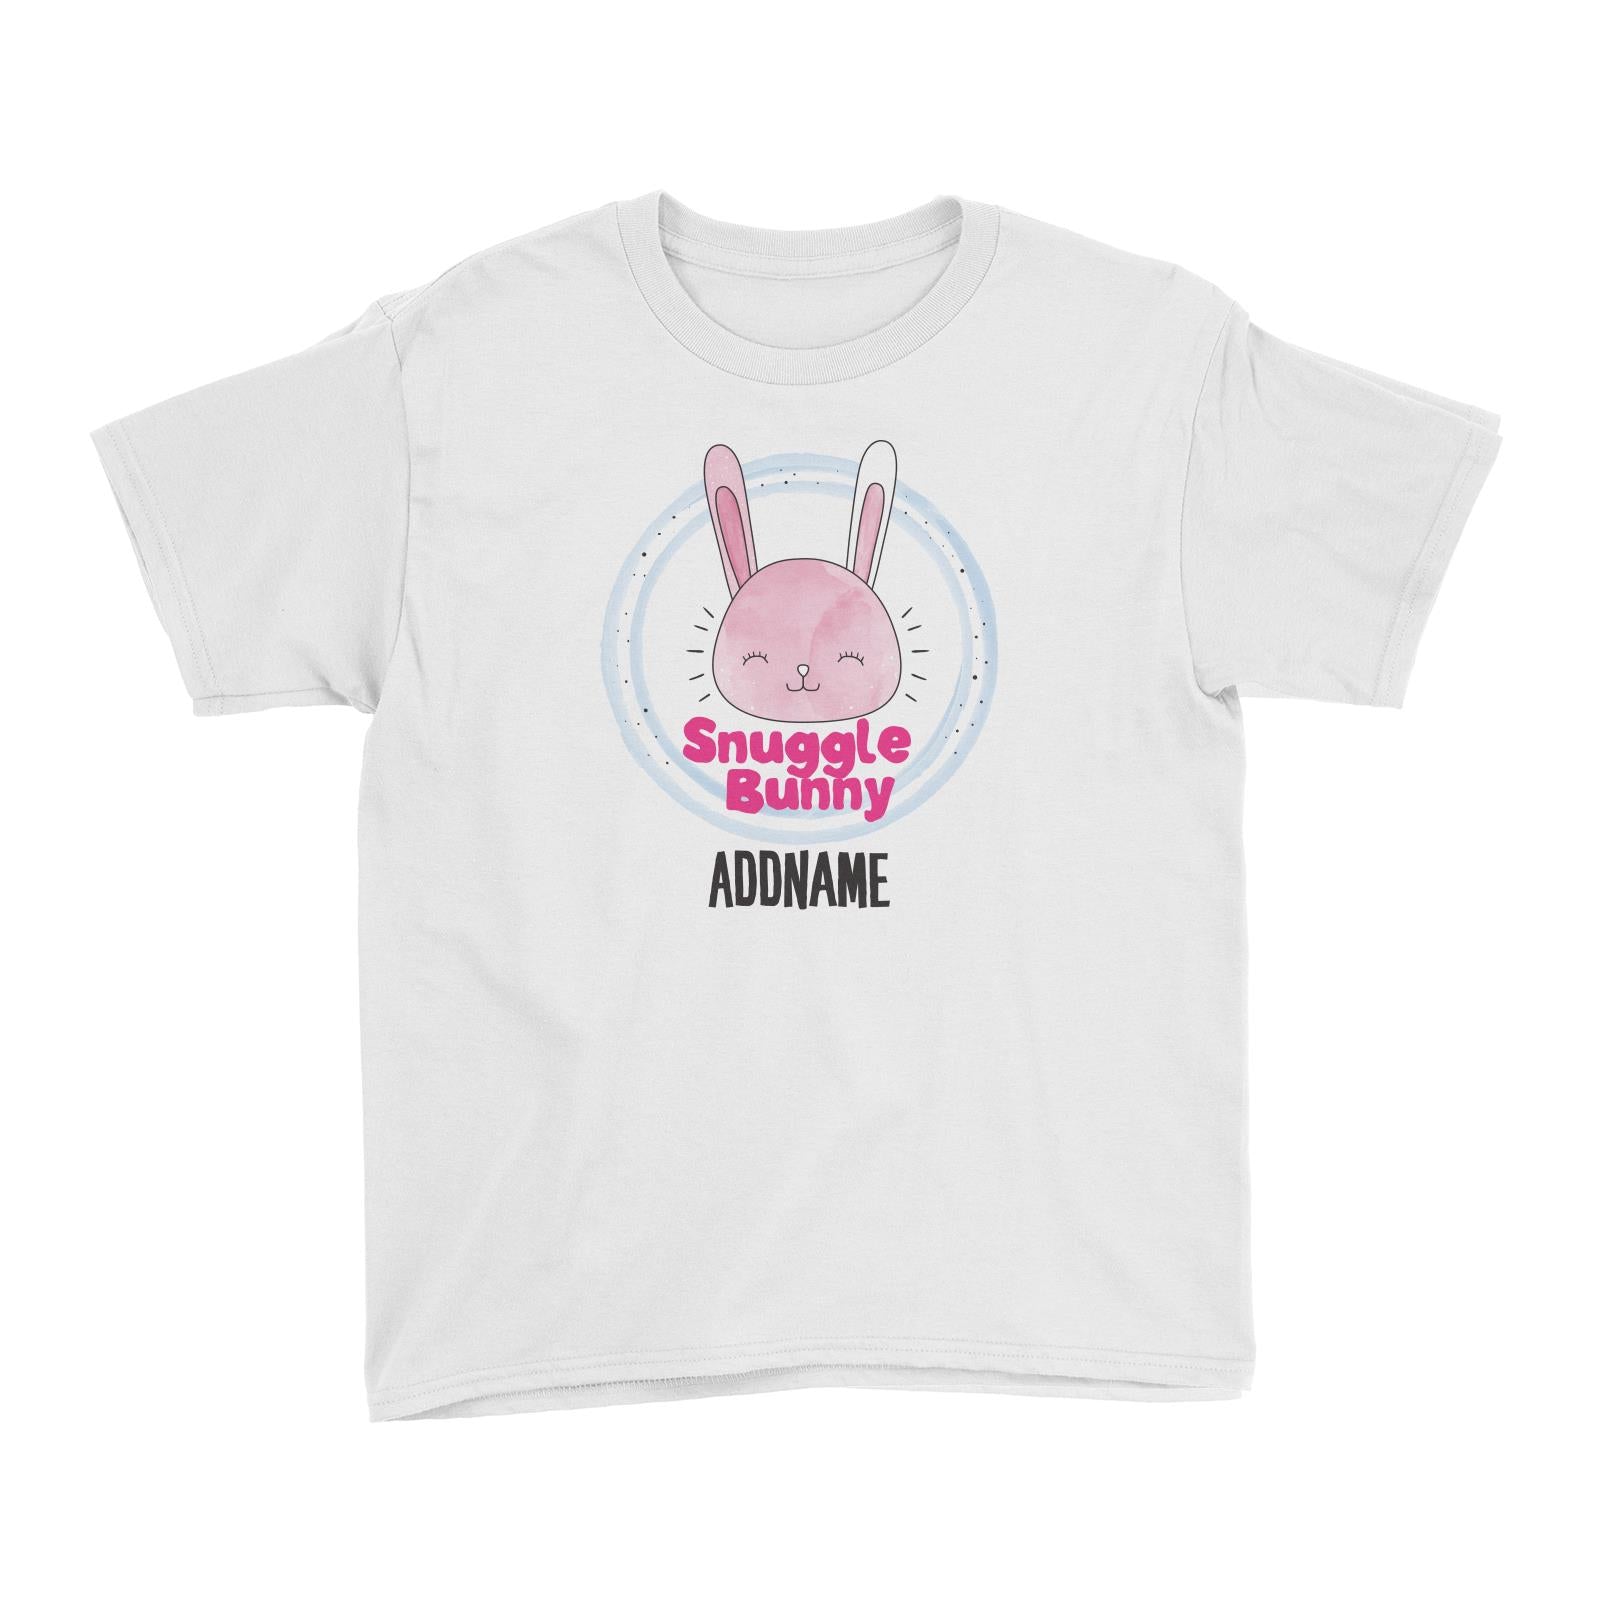 Cool Vibrant Series Snuggle Bunny Addname Kid's T-Shirt [SALE]